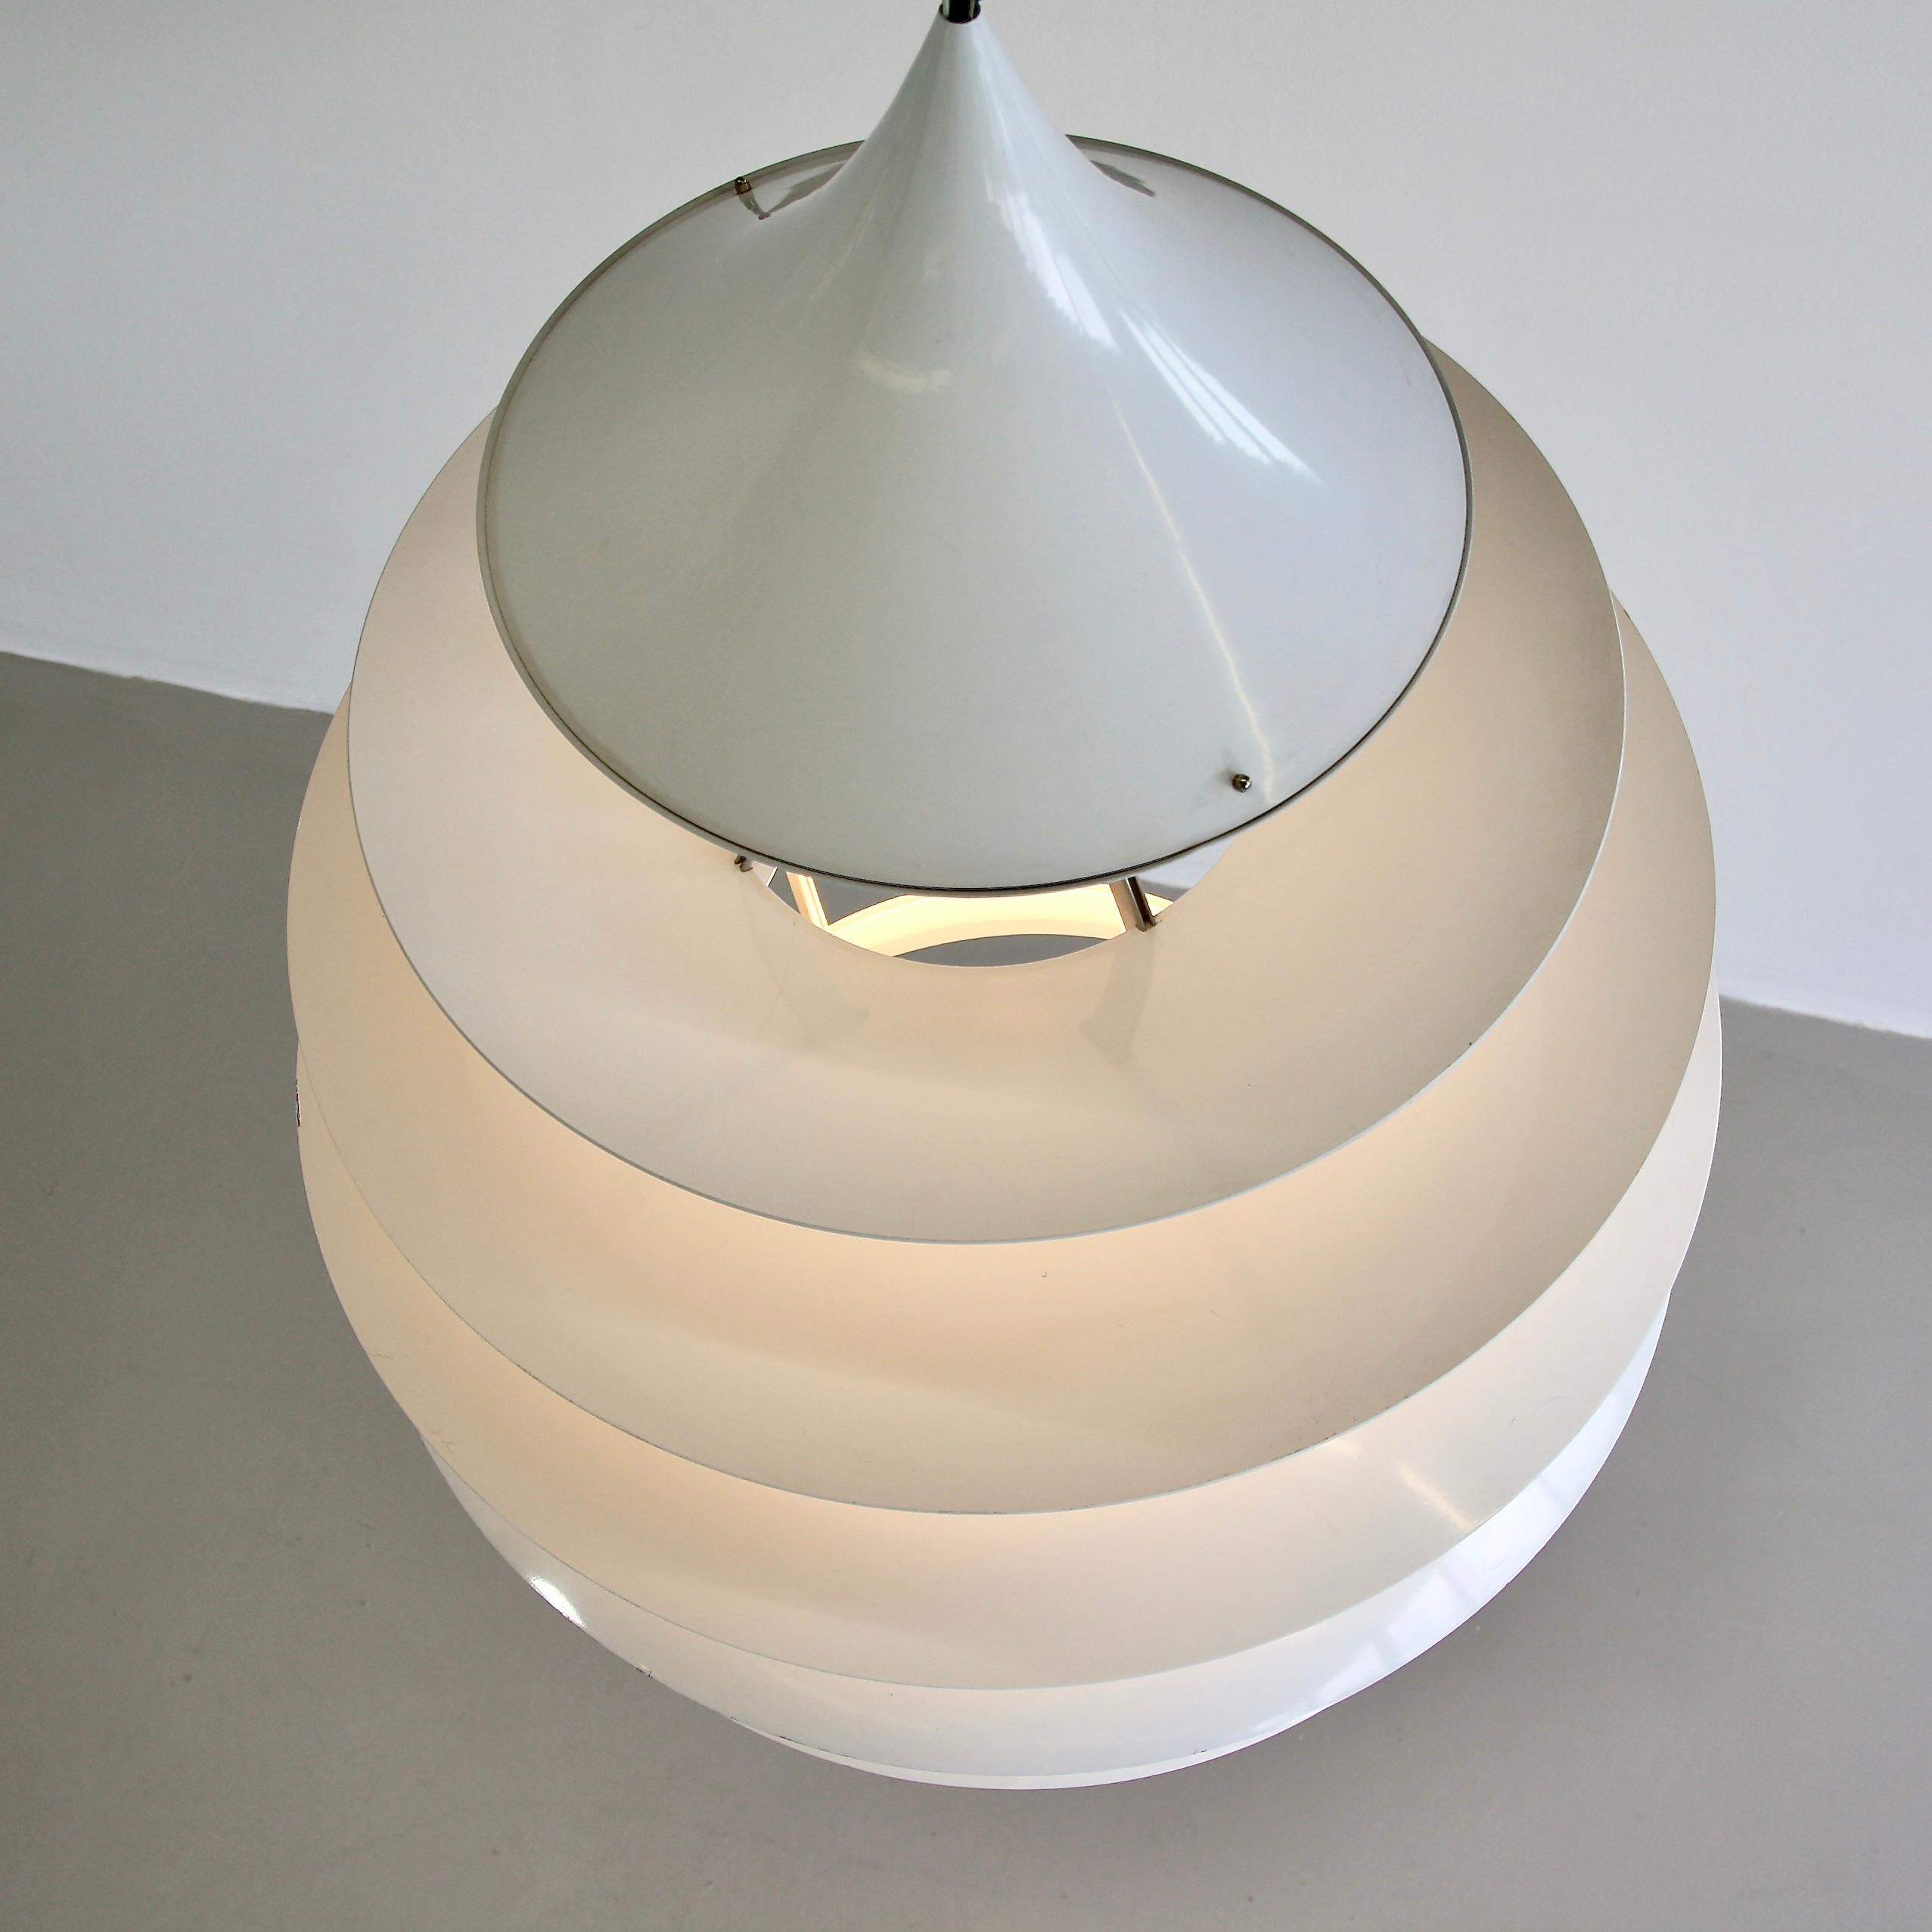 Large pendant designed by Poul Henningsen and realized by Kurt Norregaard. Denmark, Louis Poulsen, 1990.

A very large pendant, using ten circular shades of white painted aluminum, based on sketches by Poul Henningsen. The shades were designed